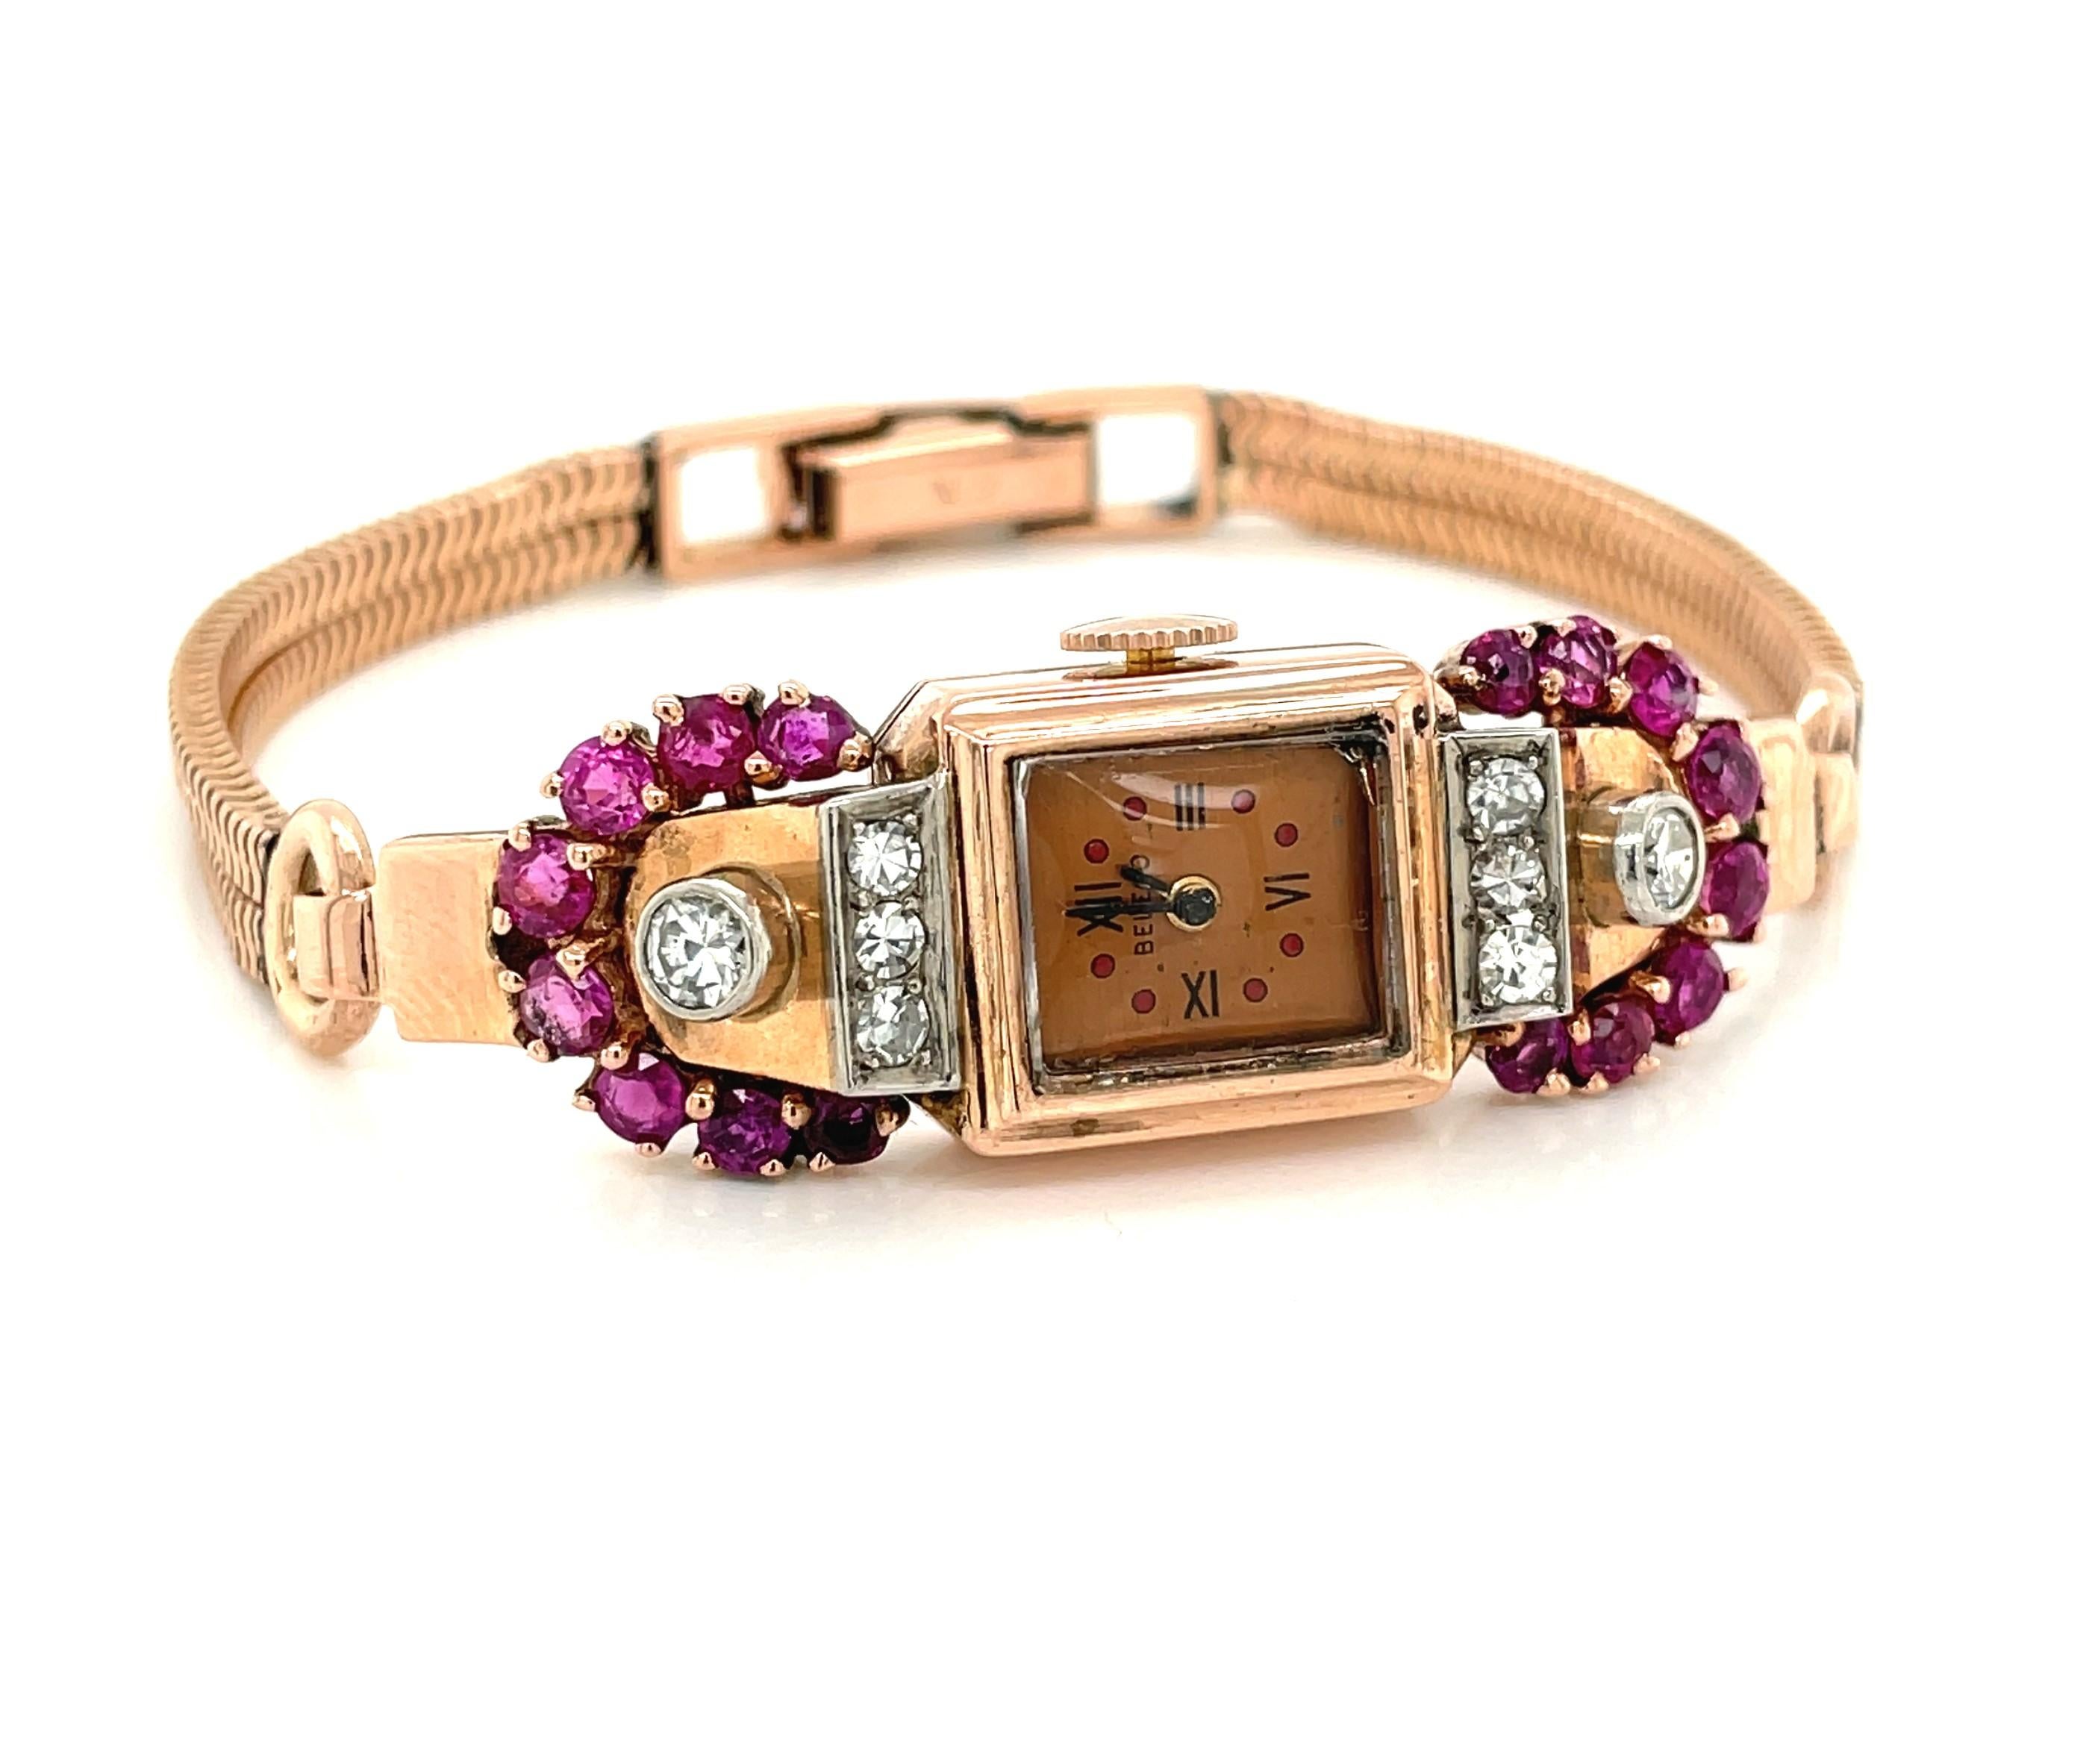 Glorious Art Deco feminine finery in 14 karat rose gold, this elegant vintage timepiece is adorned with .80 carats TW of Old Mine cut Rubies and .50 carats TW round faceted Diamonds. A Swiss made manual wind 17 jeweled movement watch by Belco keeps